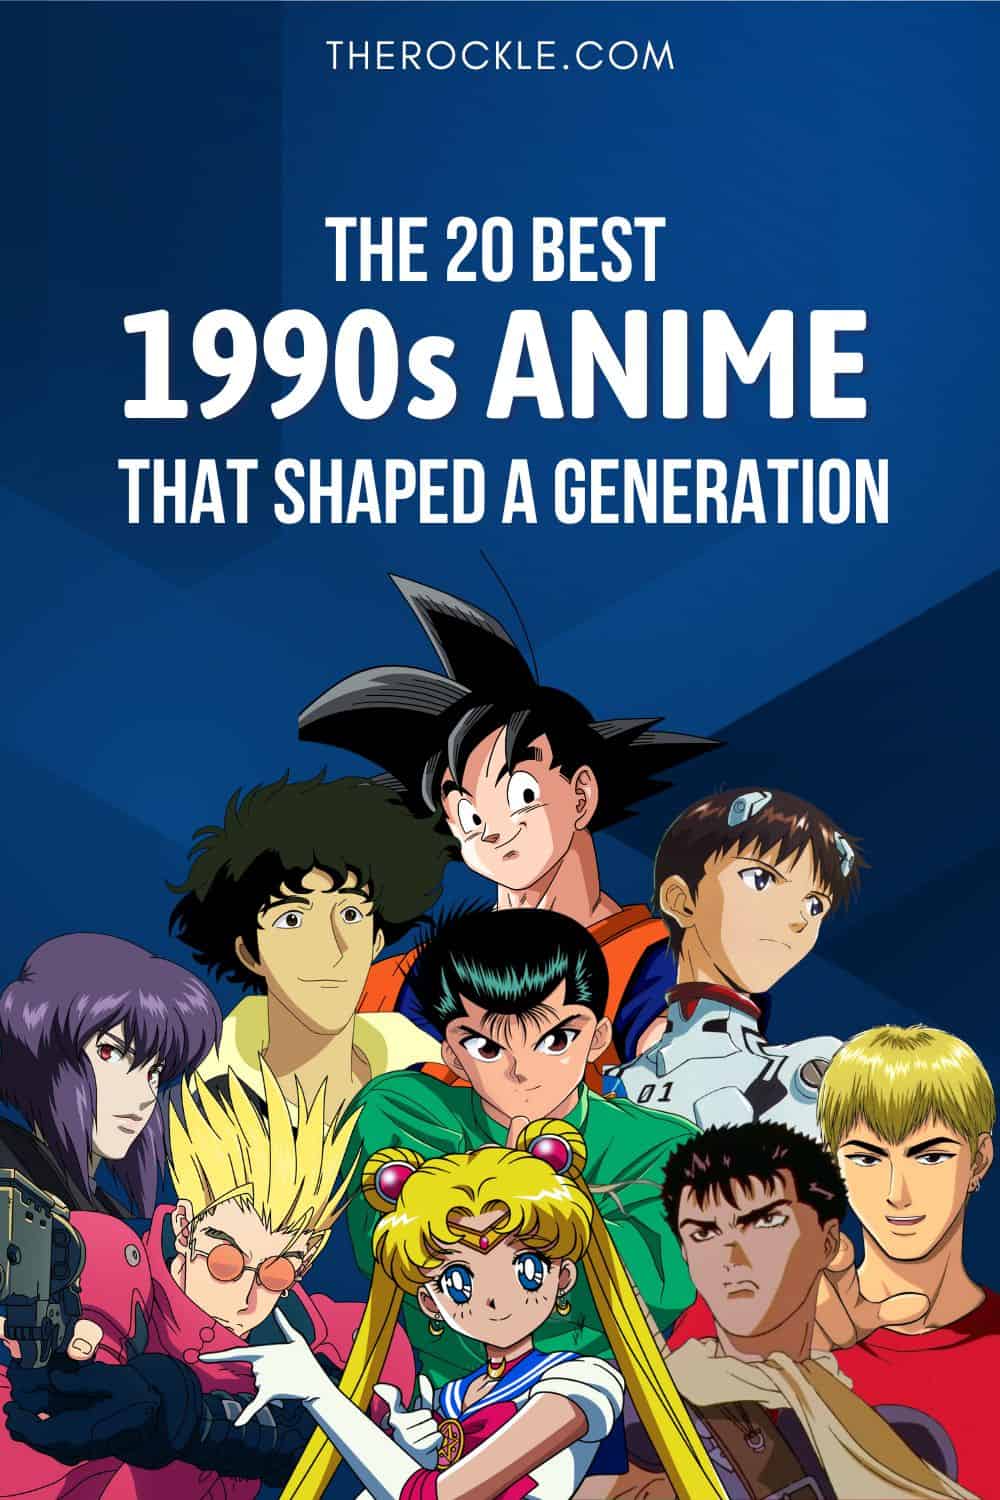 15 best 90s anime movies and TV shows that have become iconic - Legit.ng